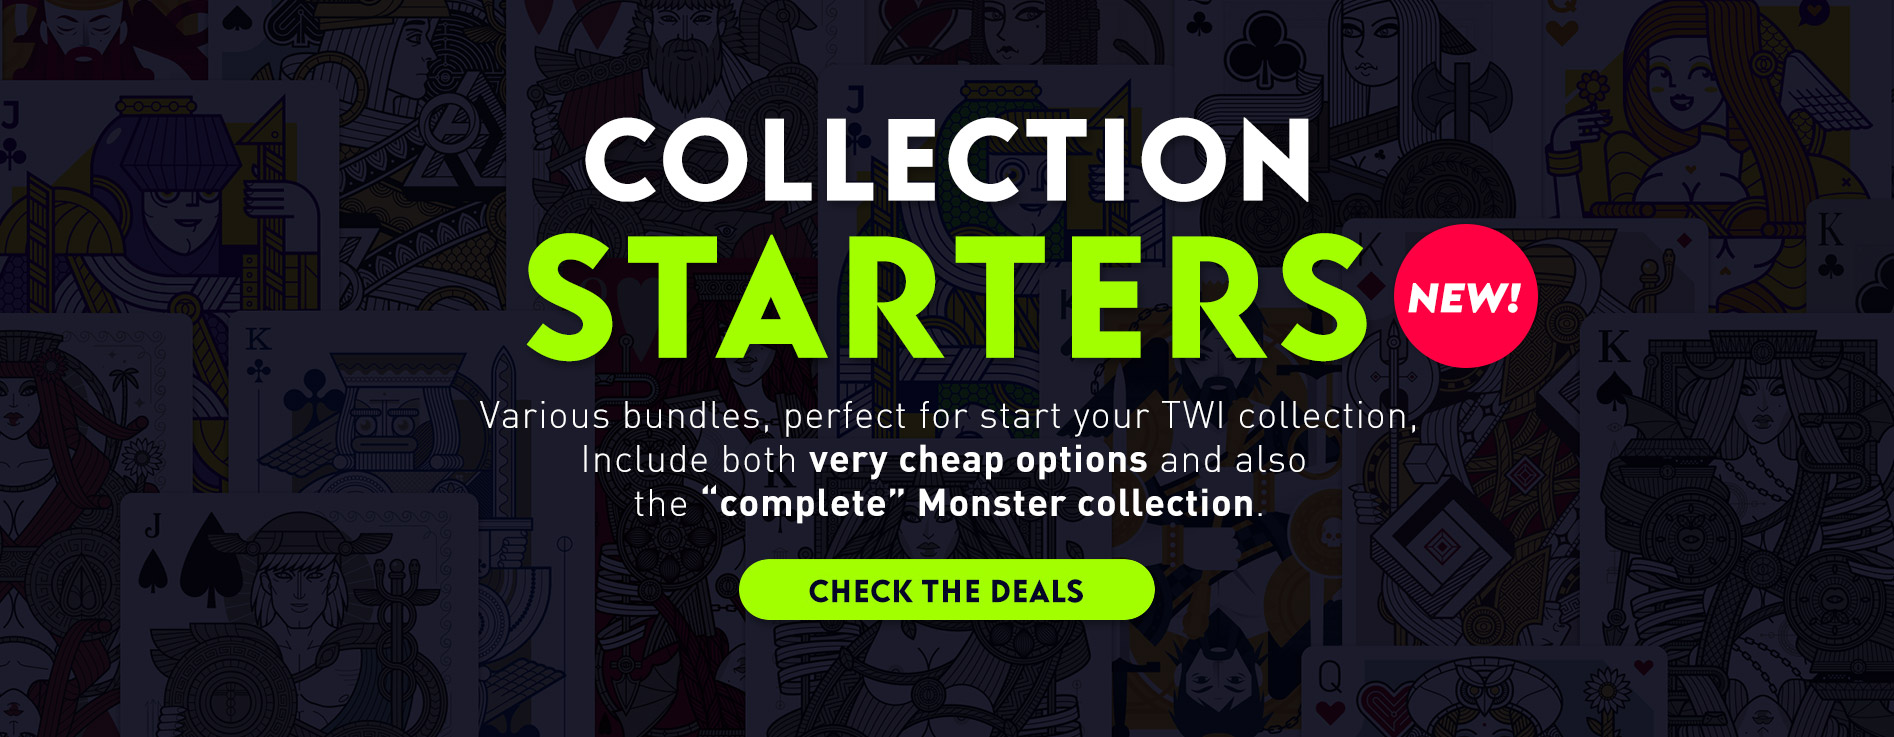 Collection Starter Discount